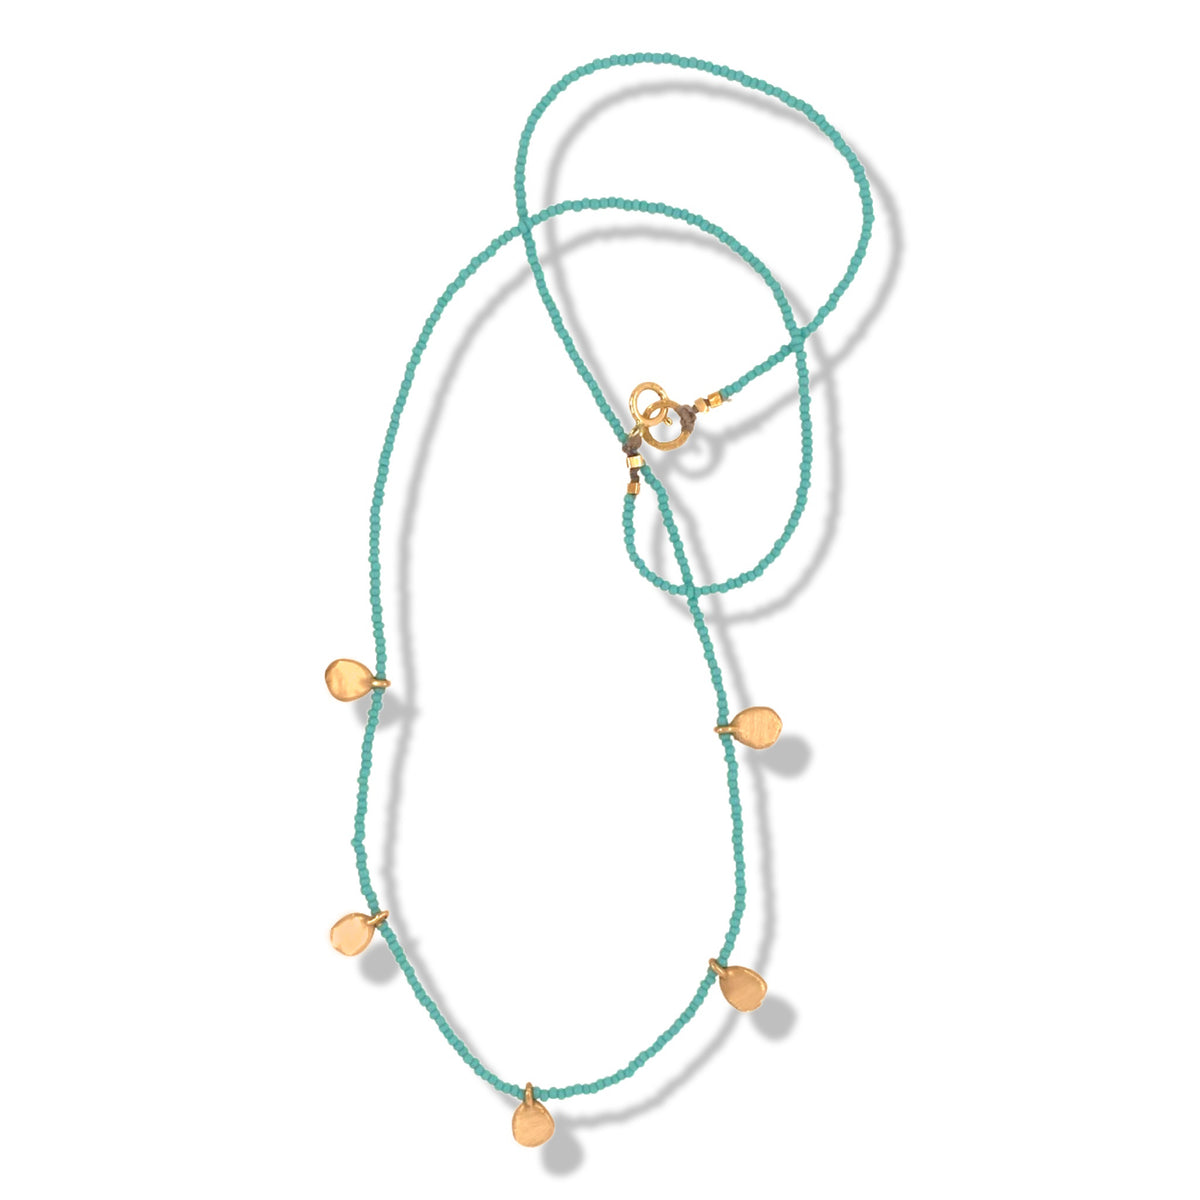    Keely_Smith_Jewelry_Designs_14k_Dot_Necklace_On_Micro_Turquoise_Beads